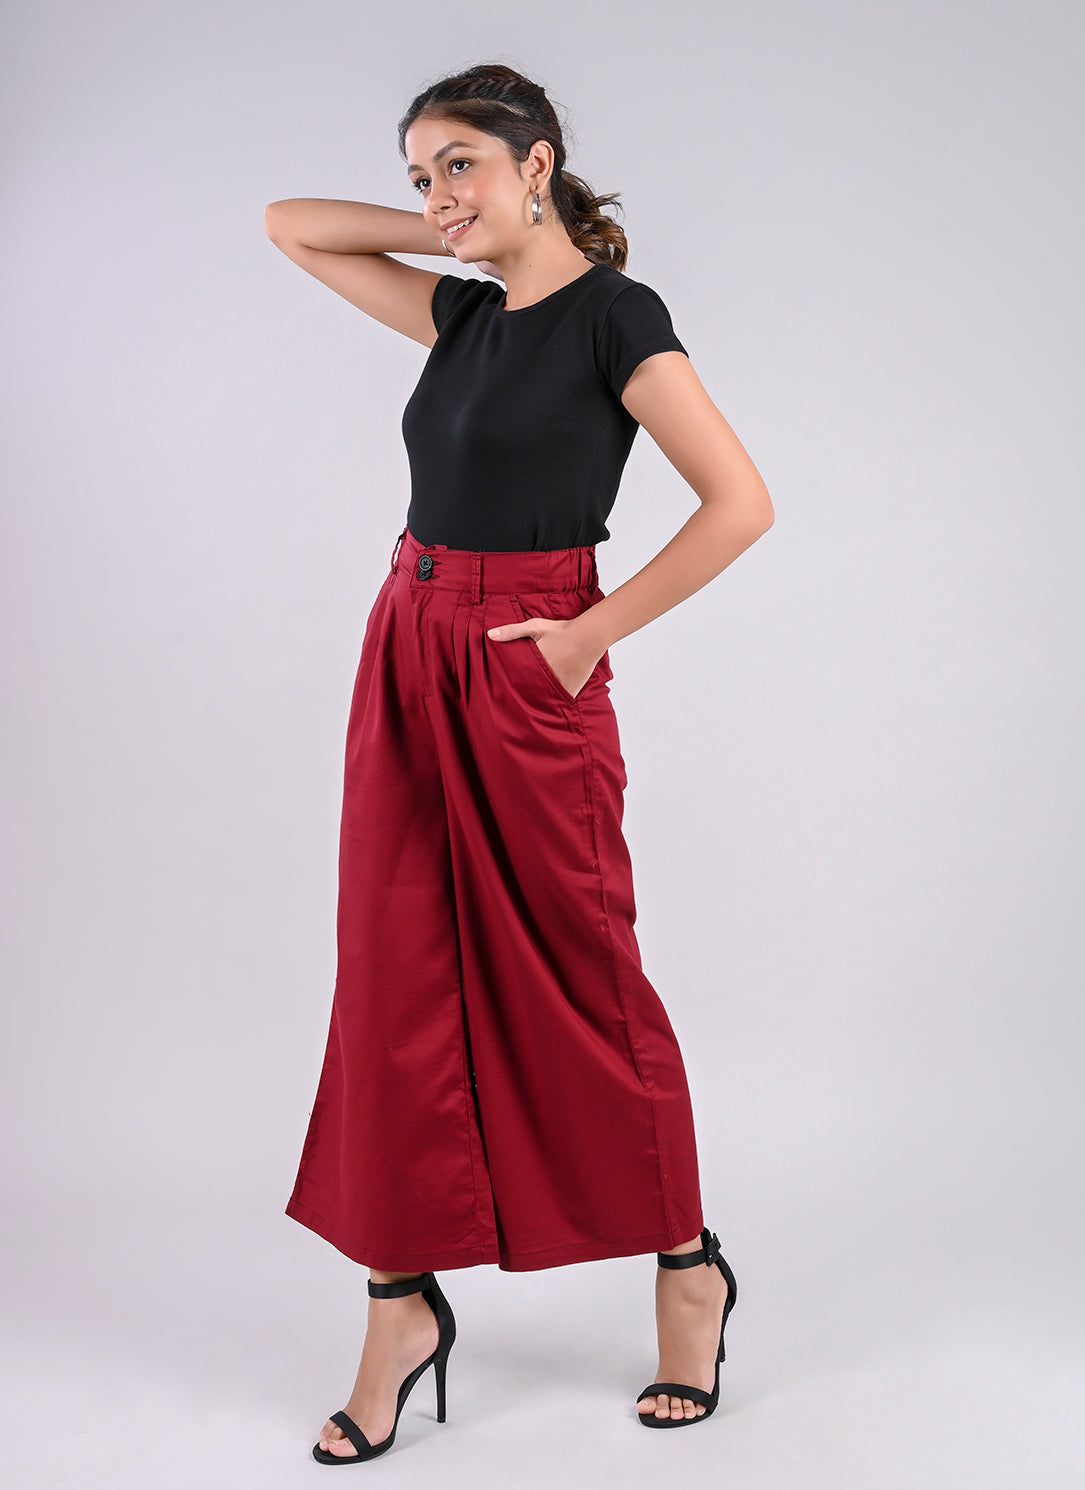 PLEATED PALAZZO PANTS IN ROSEWOOD